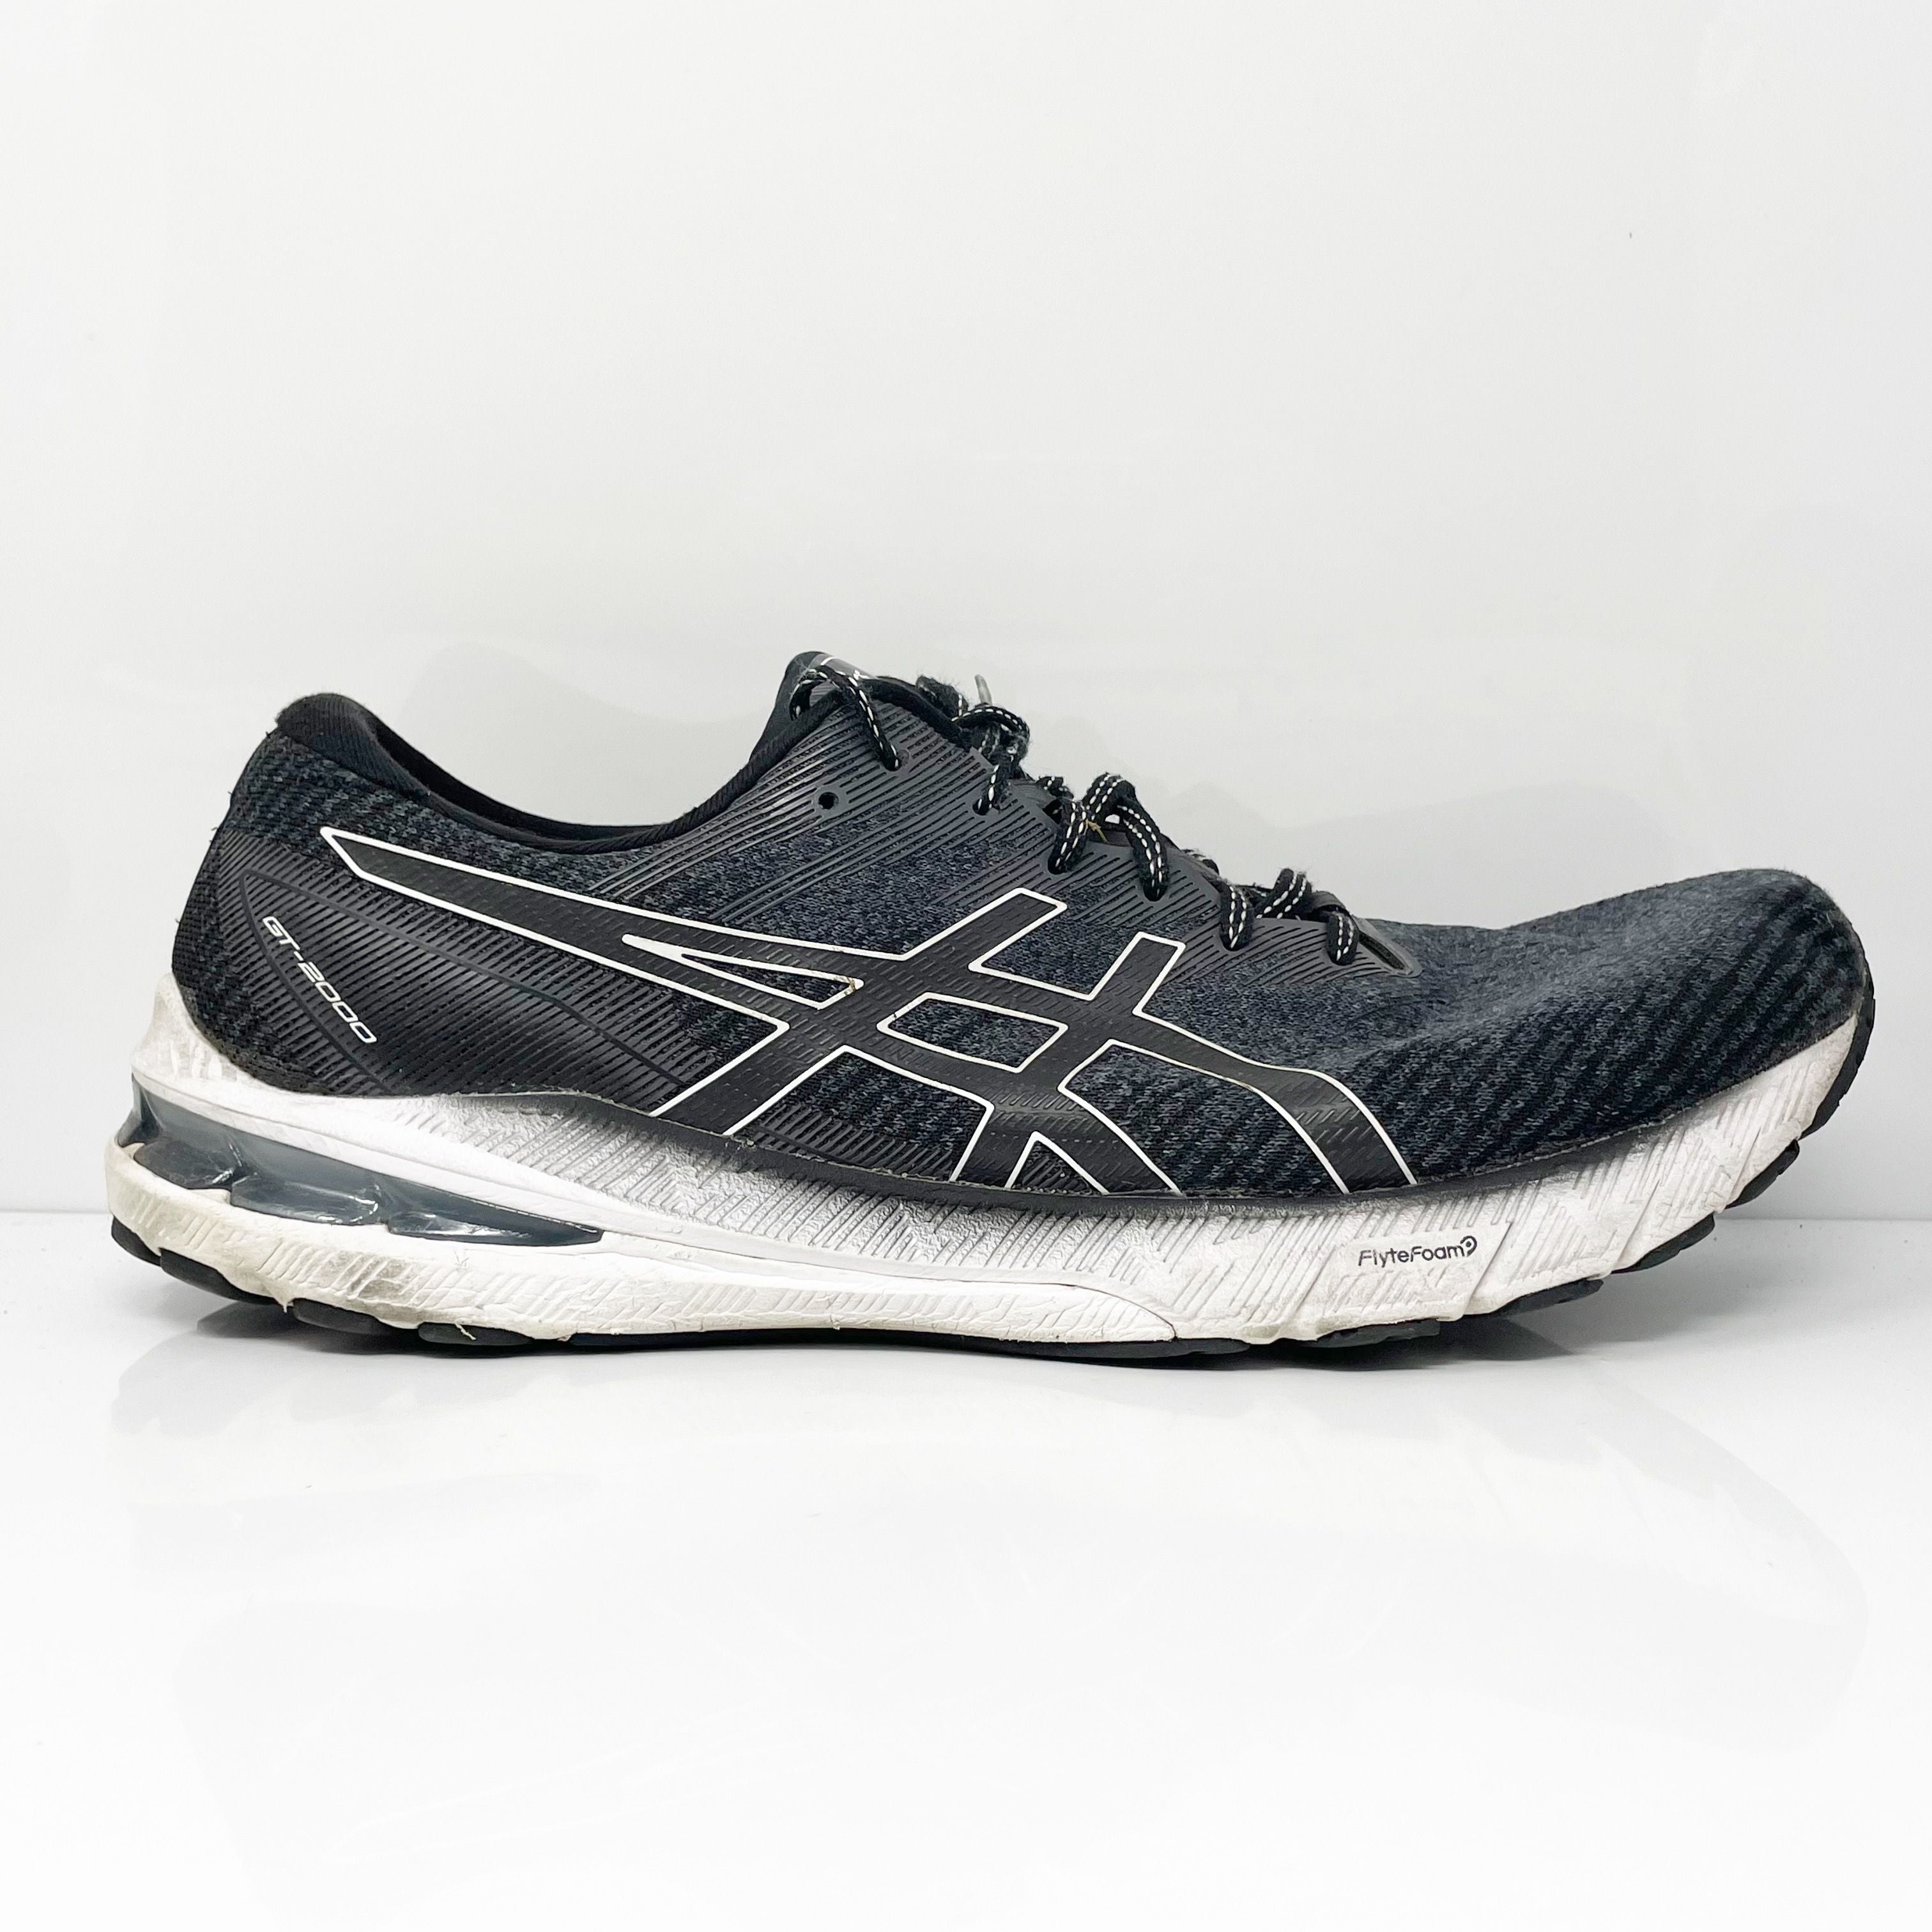 Asics Mens GT 2000 10 1011B186 Black Running Shoes Sneakers Size 13 W ...